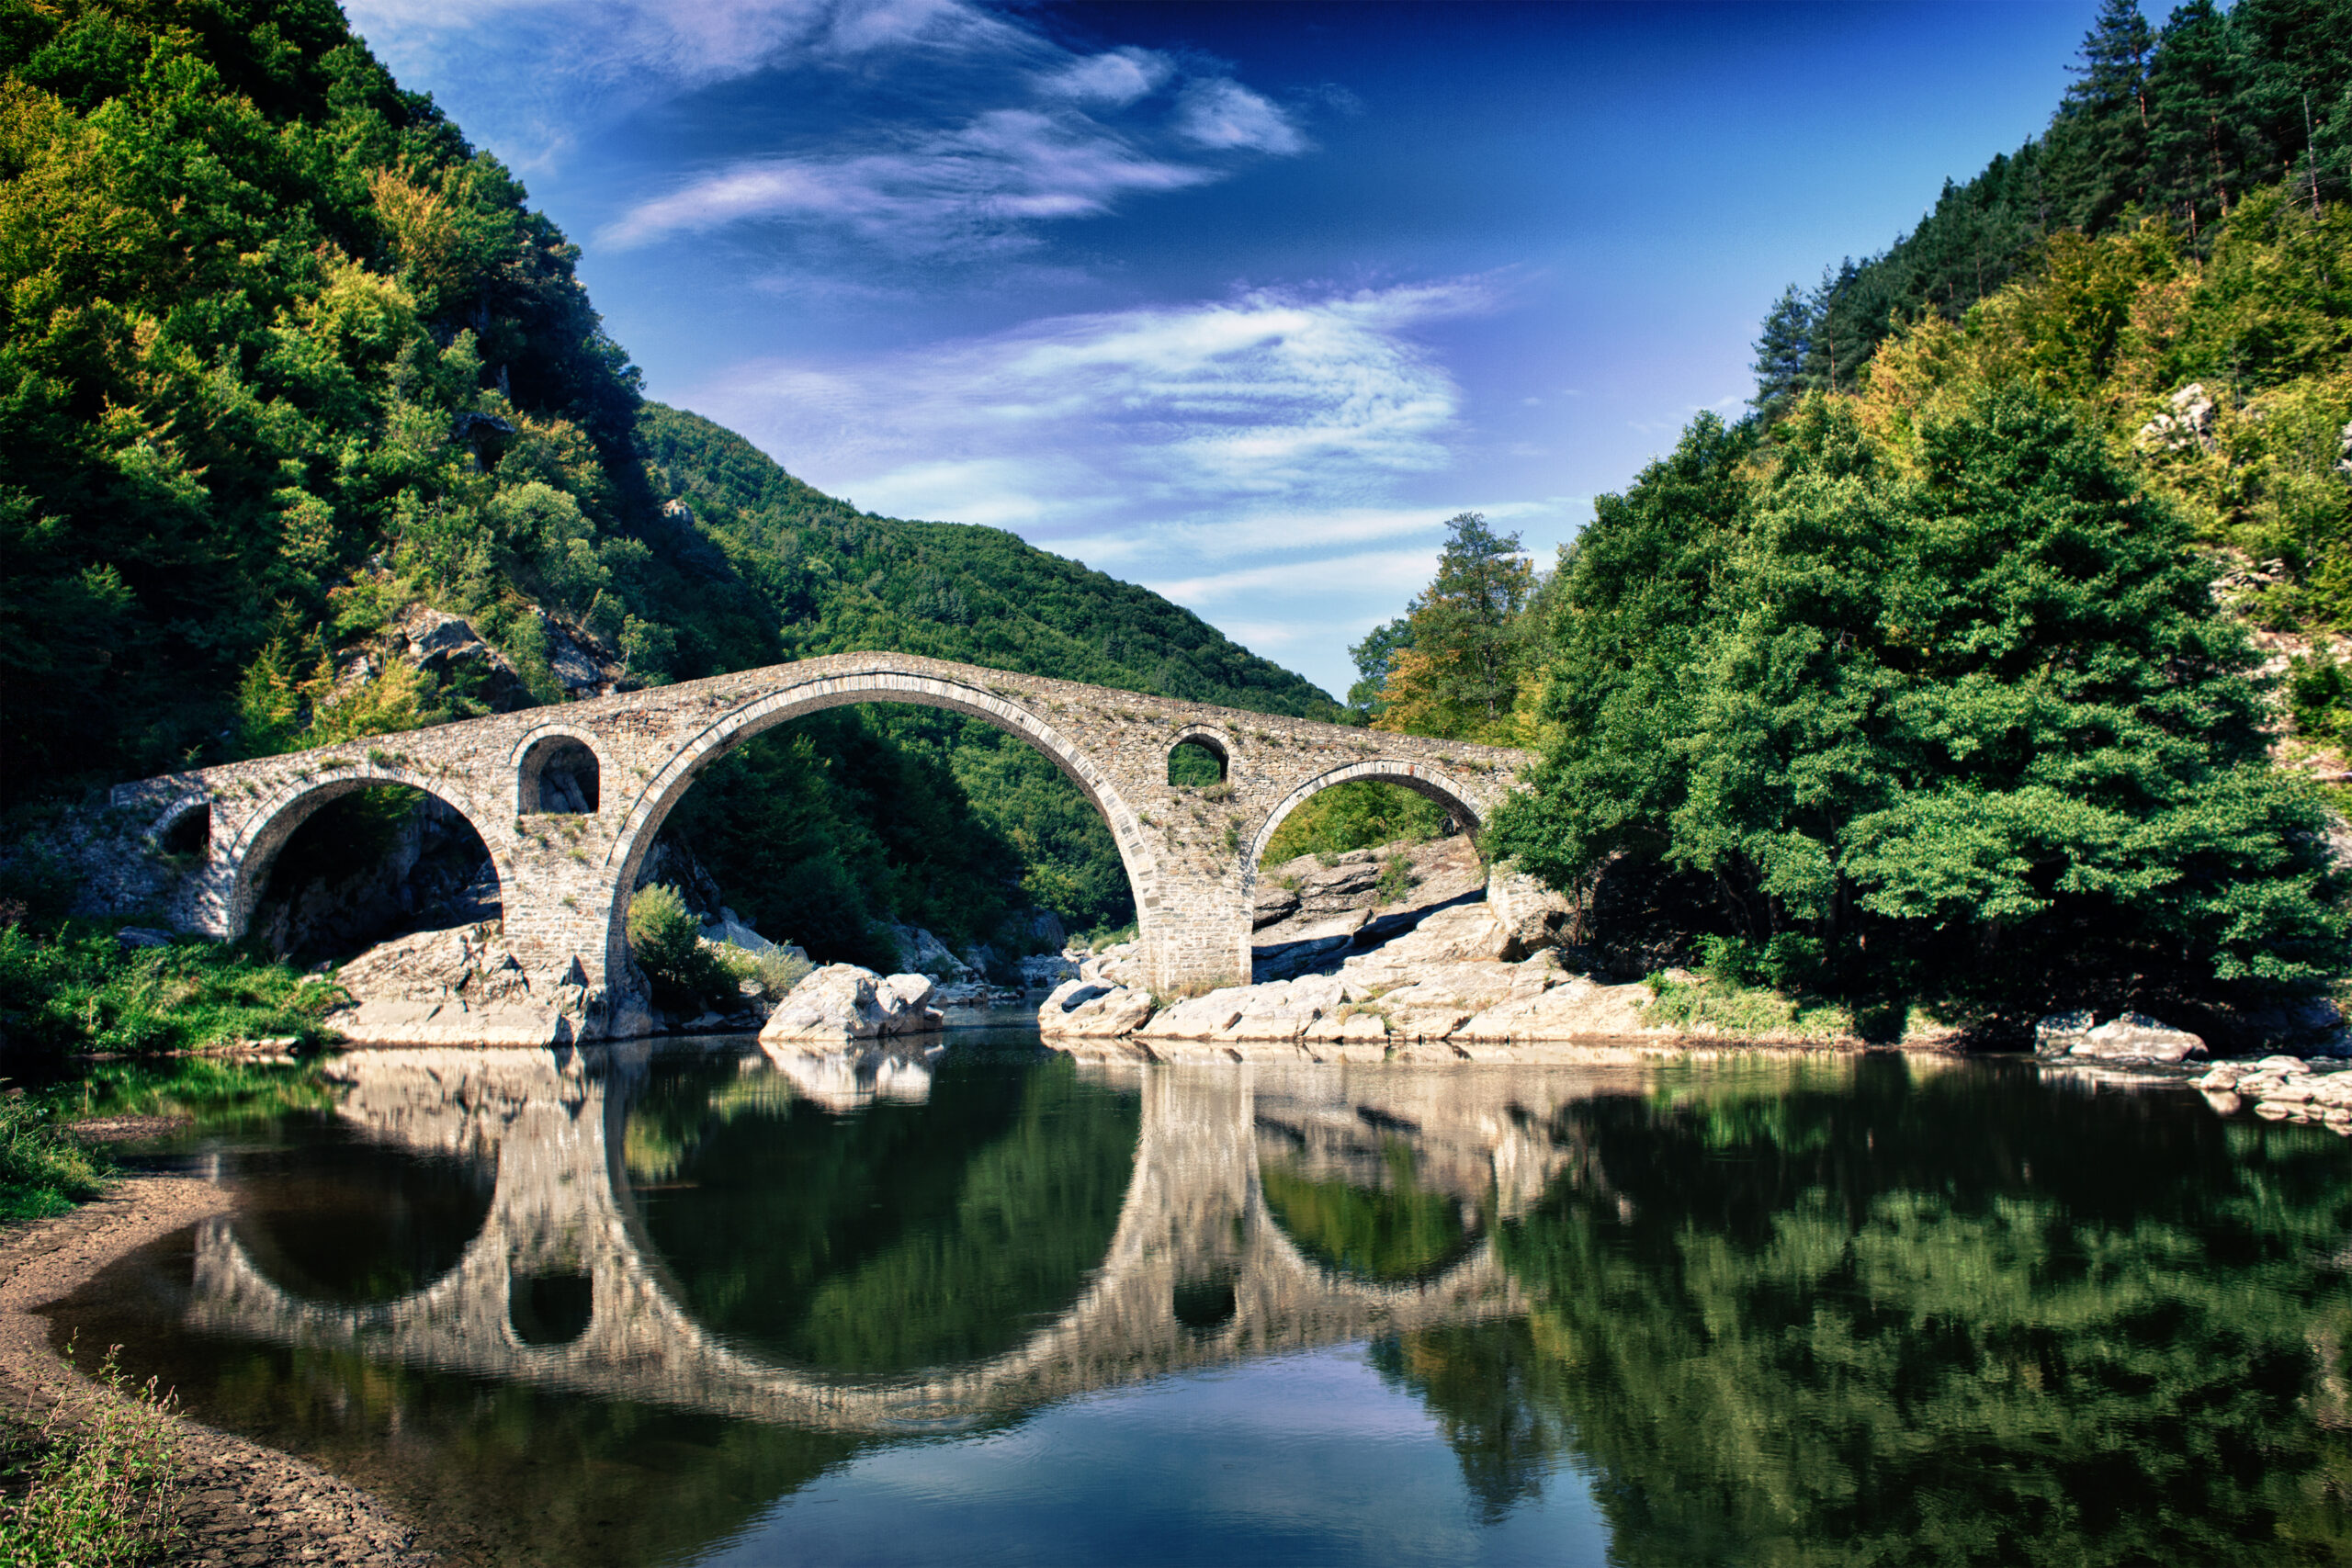 Arched bridge on river that connects the mountains with the lower land.